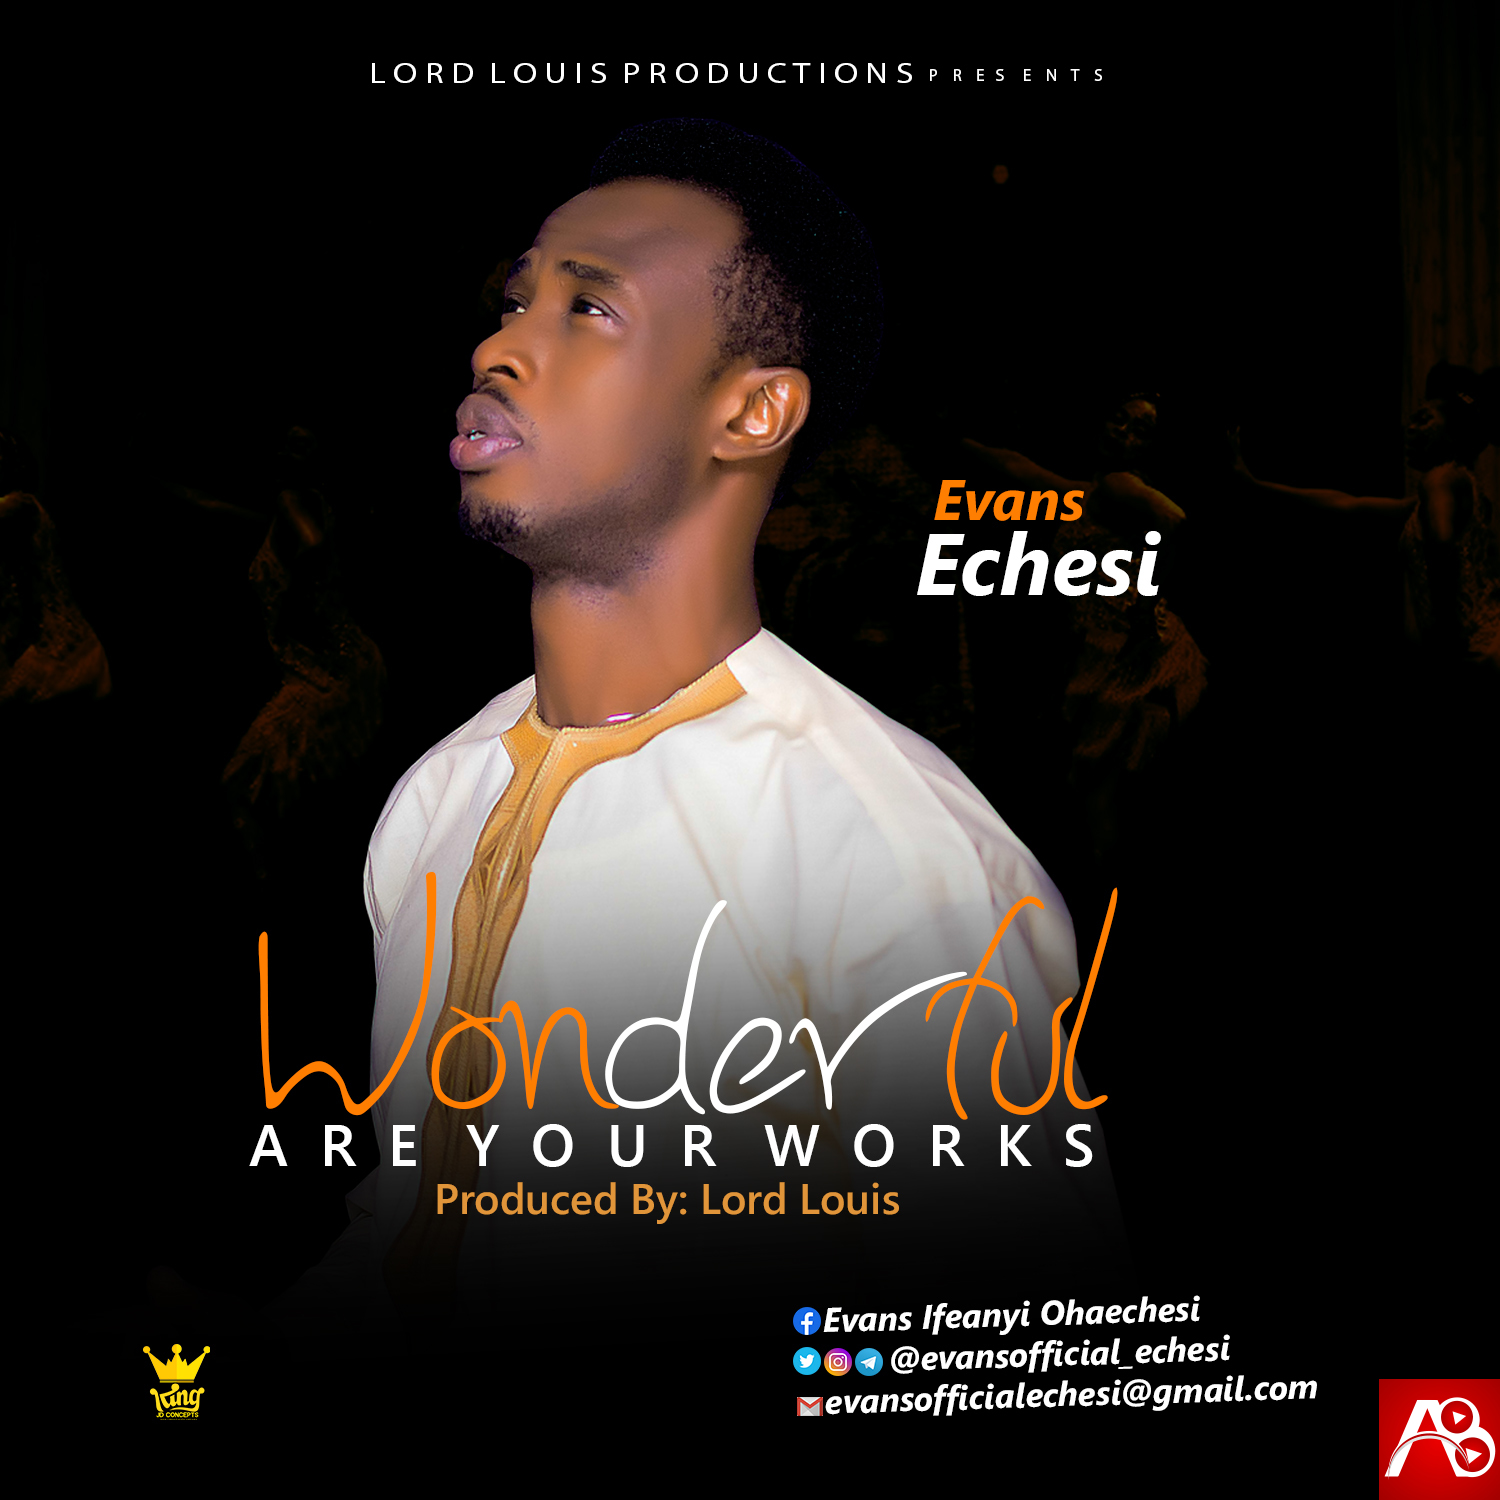 Evans Echesi - Wonderful Are Your Works